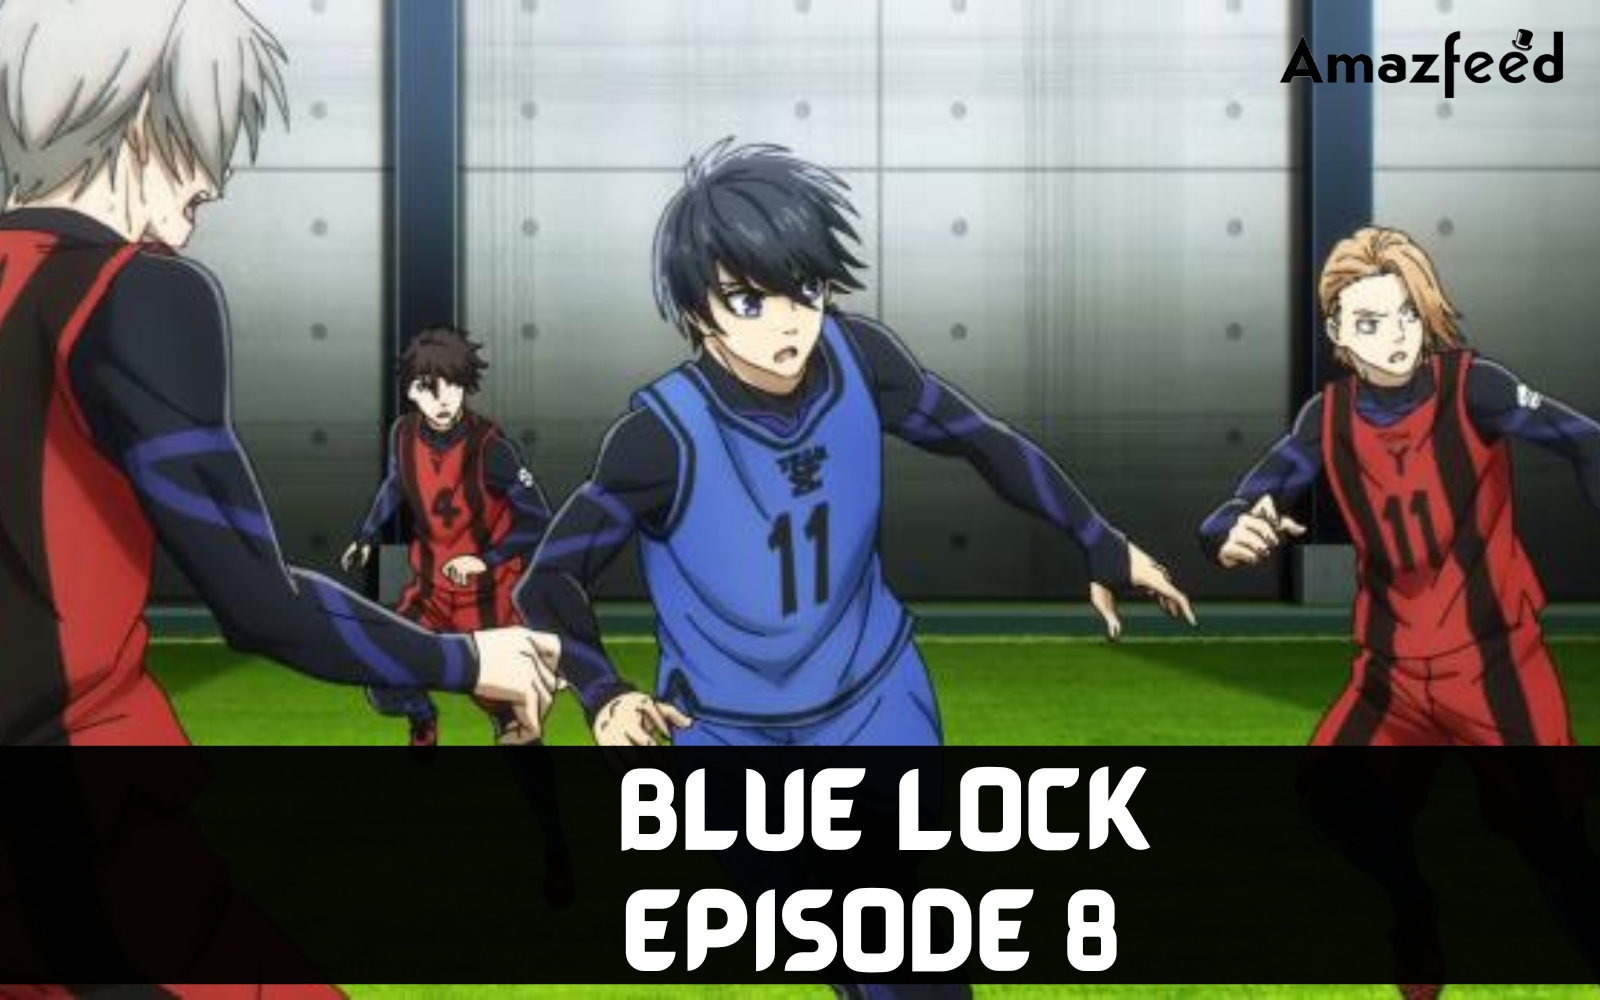 Blue Lock Episode 8 Spoilers, Review, Recap, Release Date, Promo, Cast, &  Where to Watch » Amazfeed